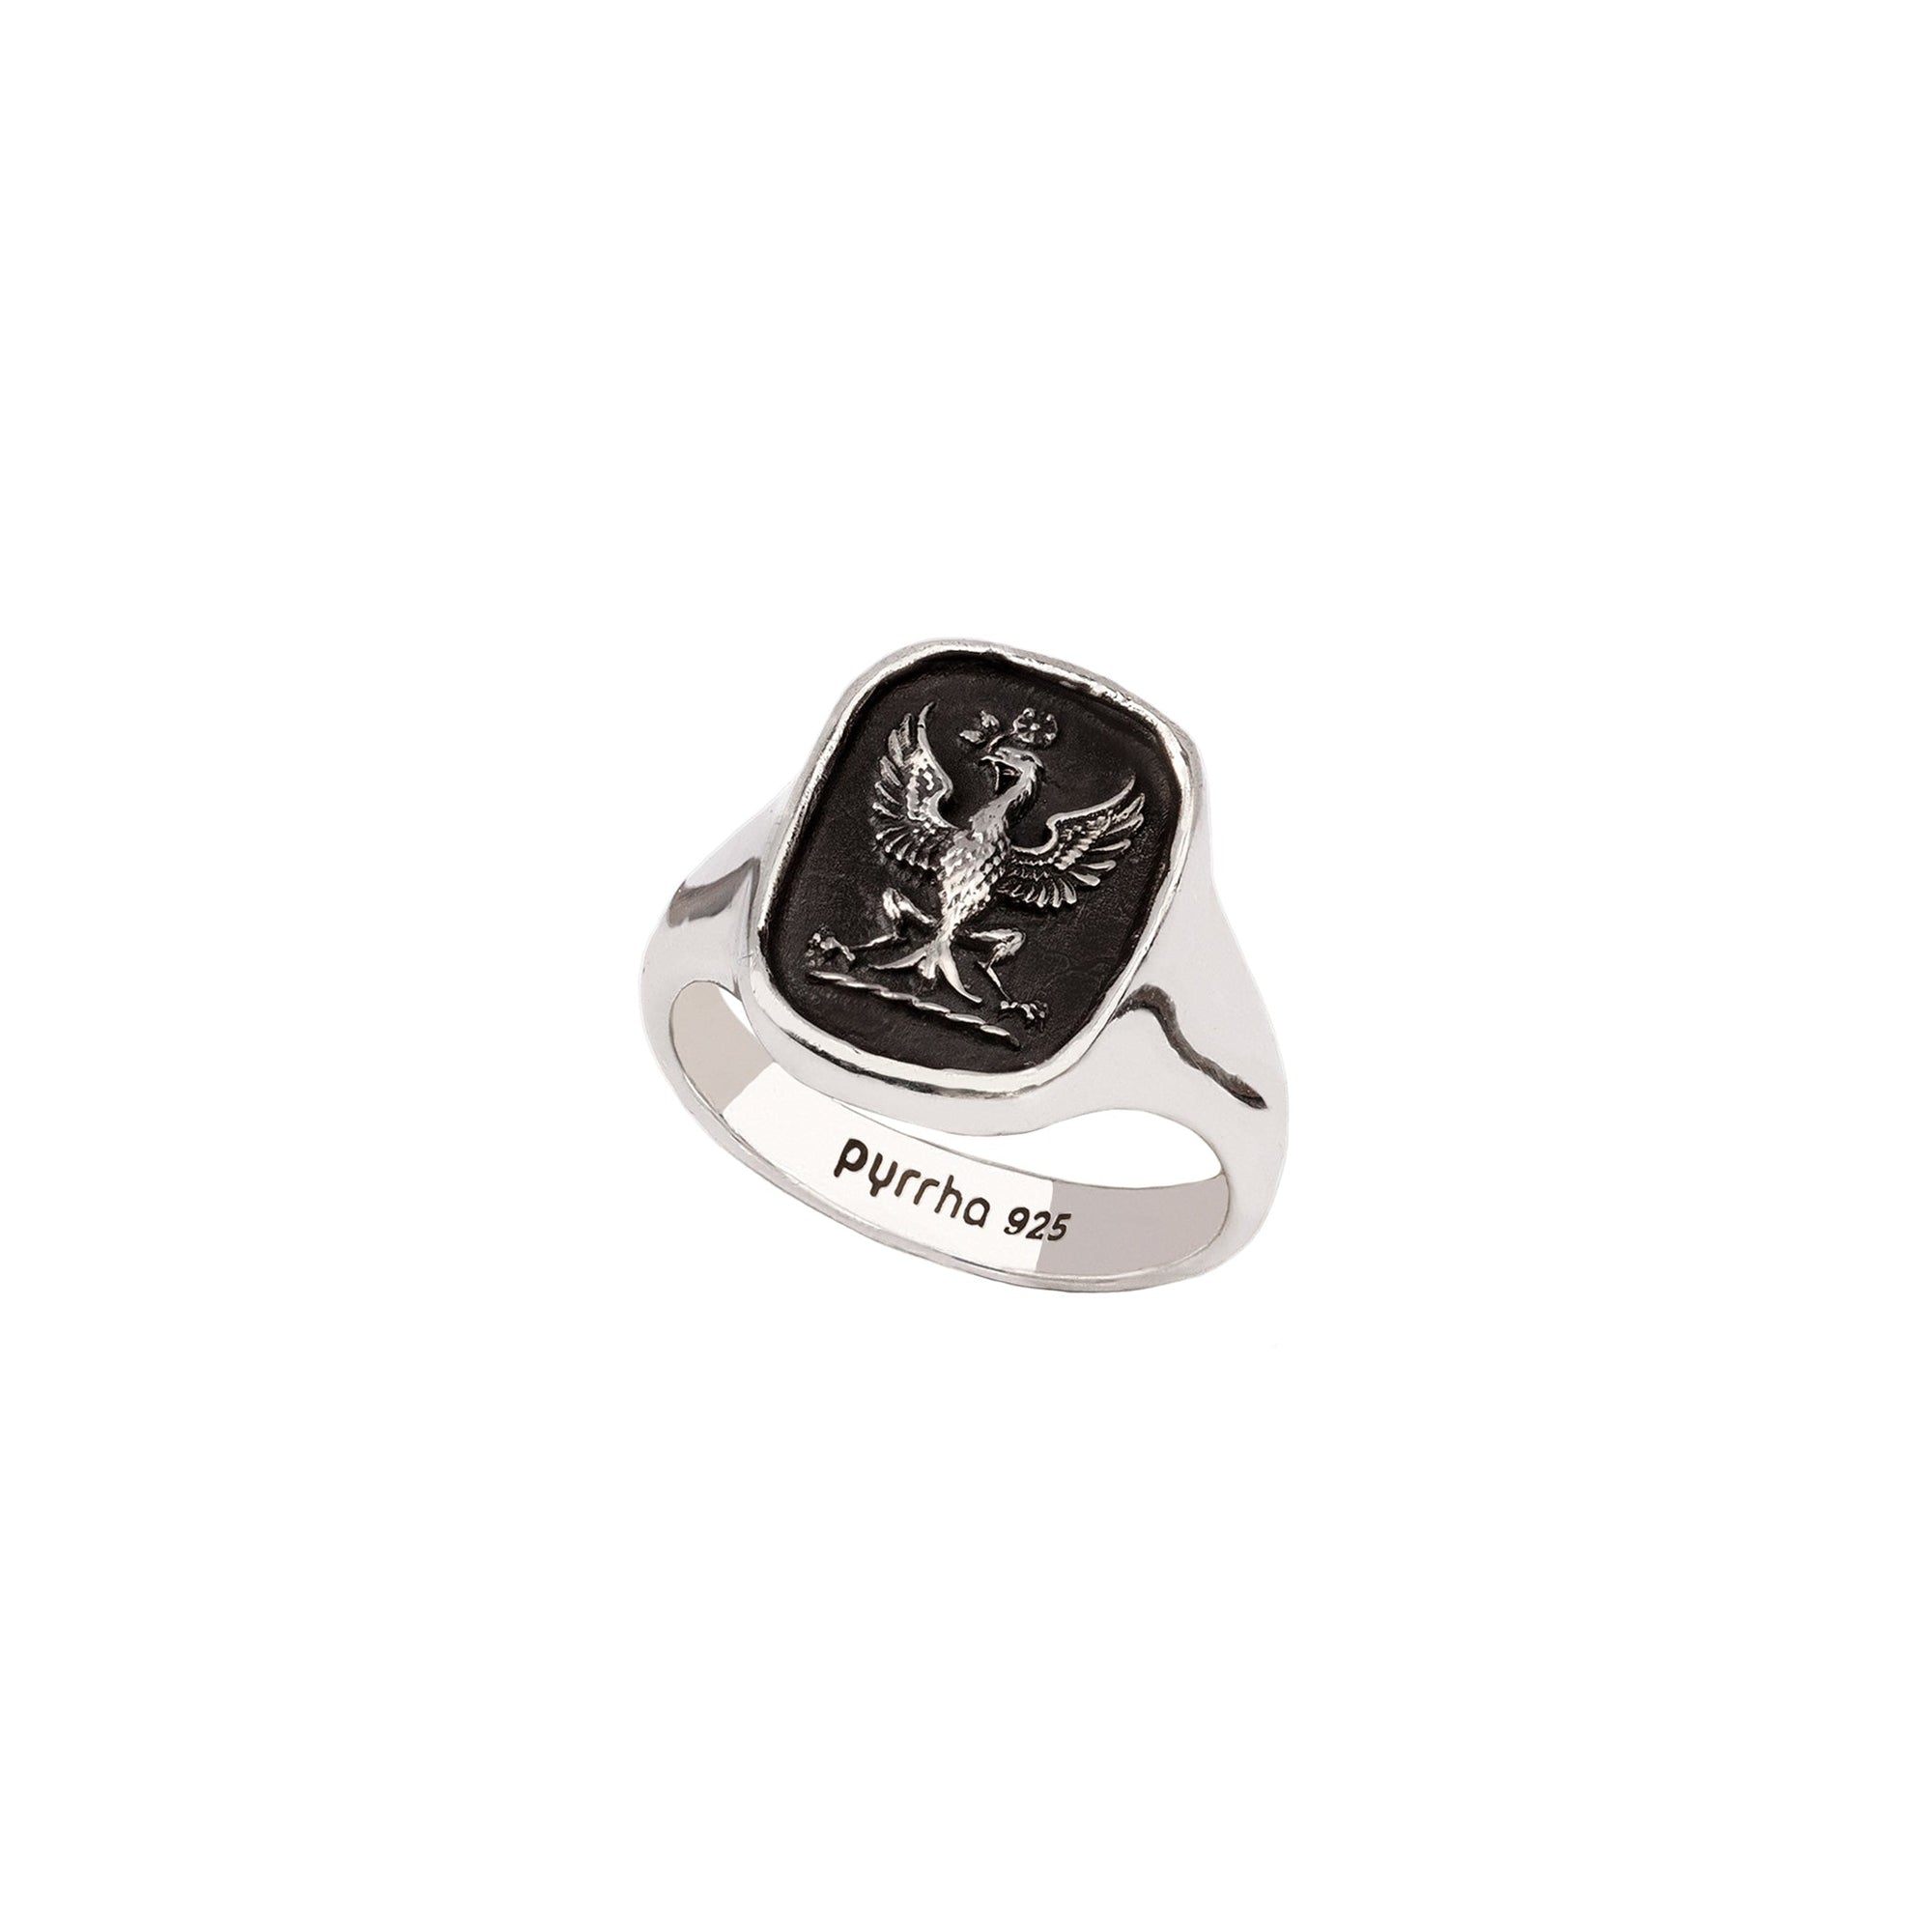 Follow Your Dreams Signet Ring